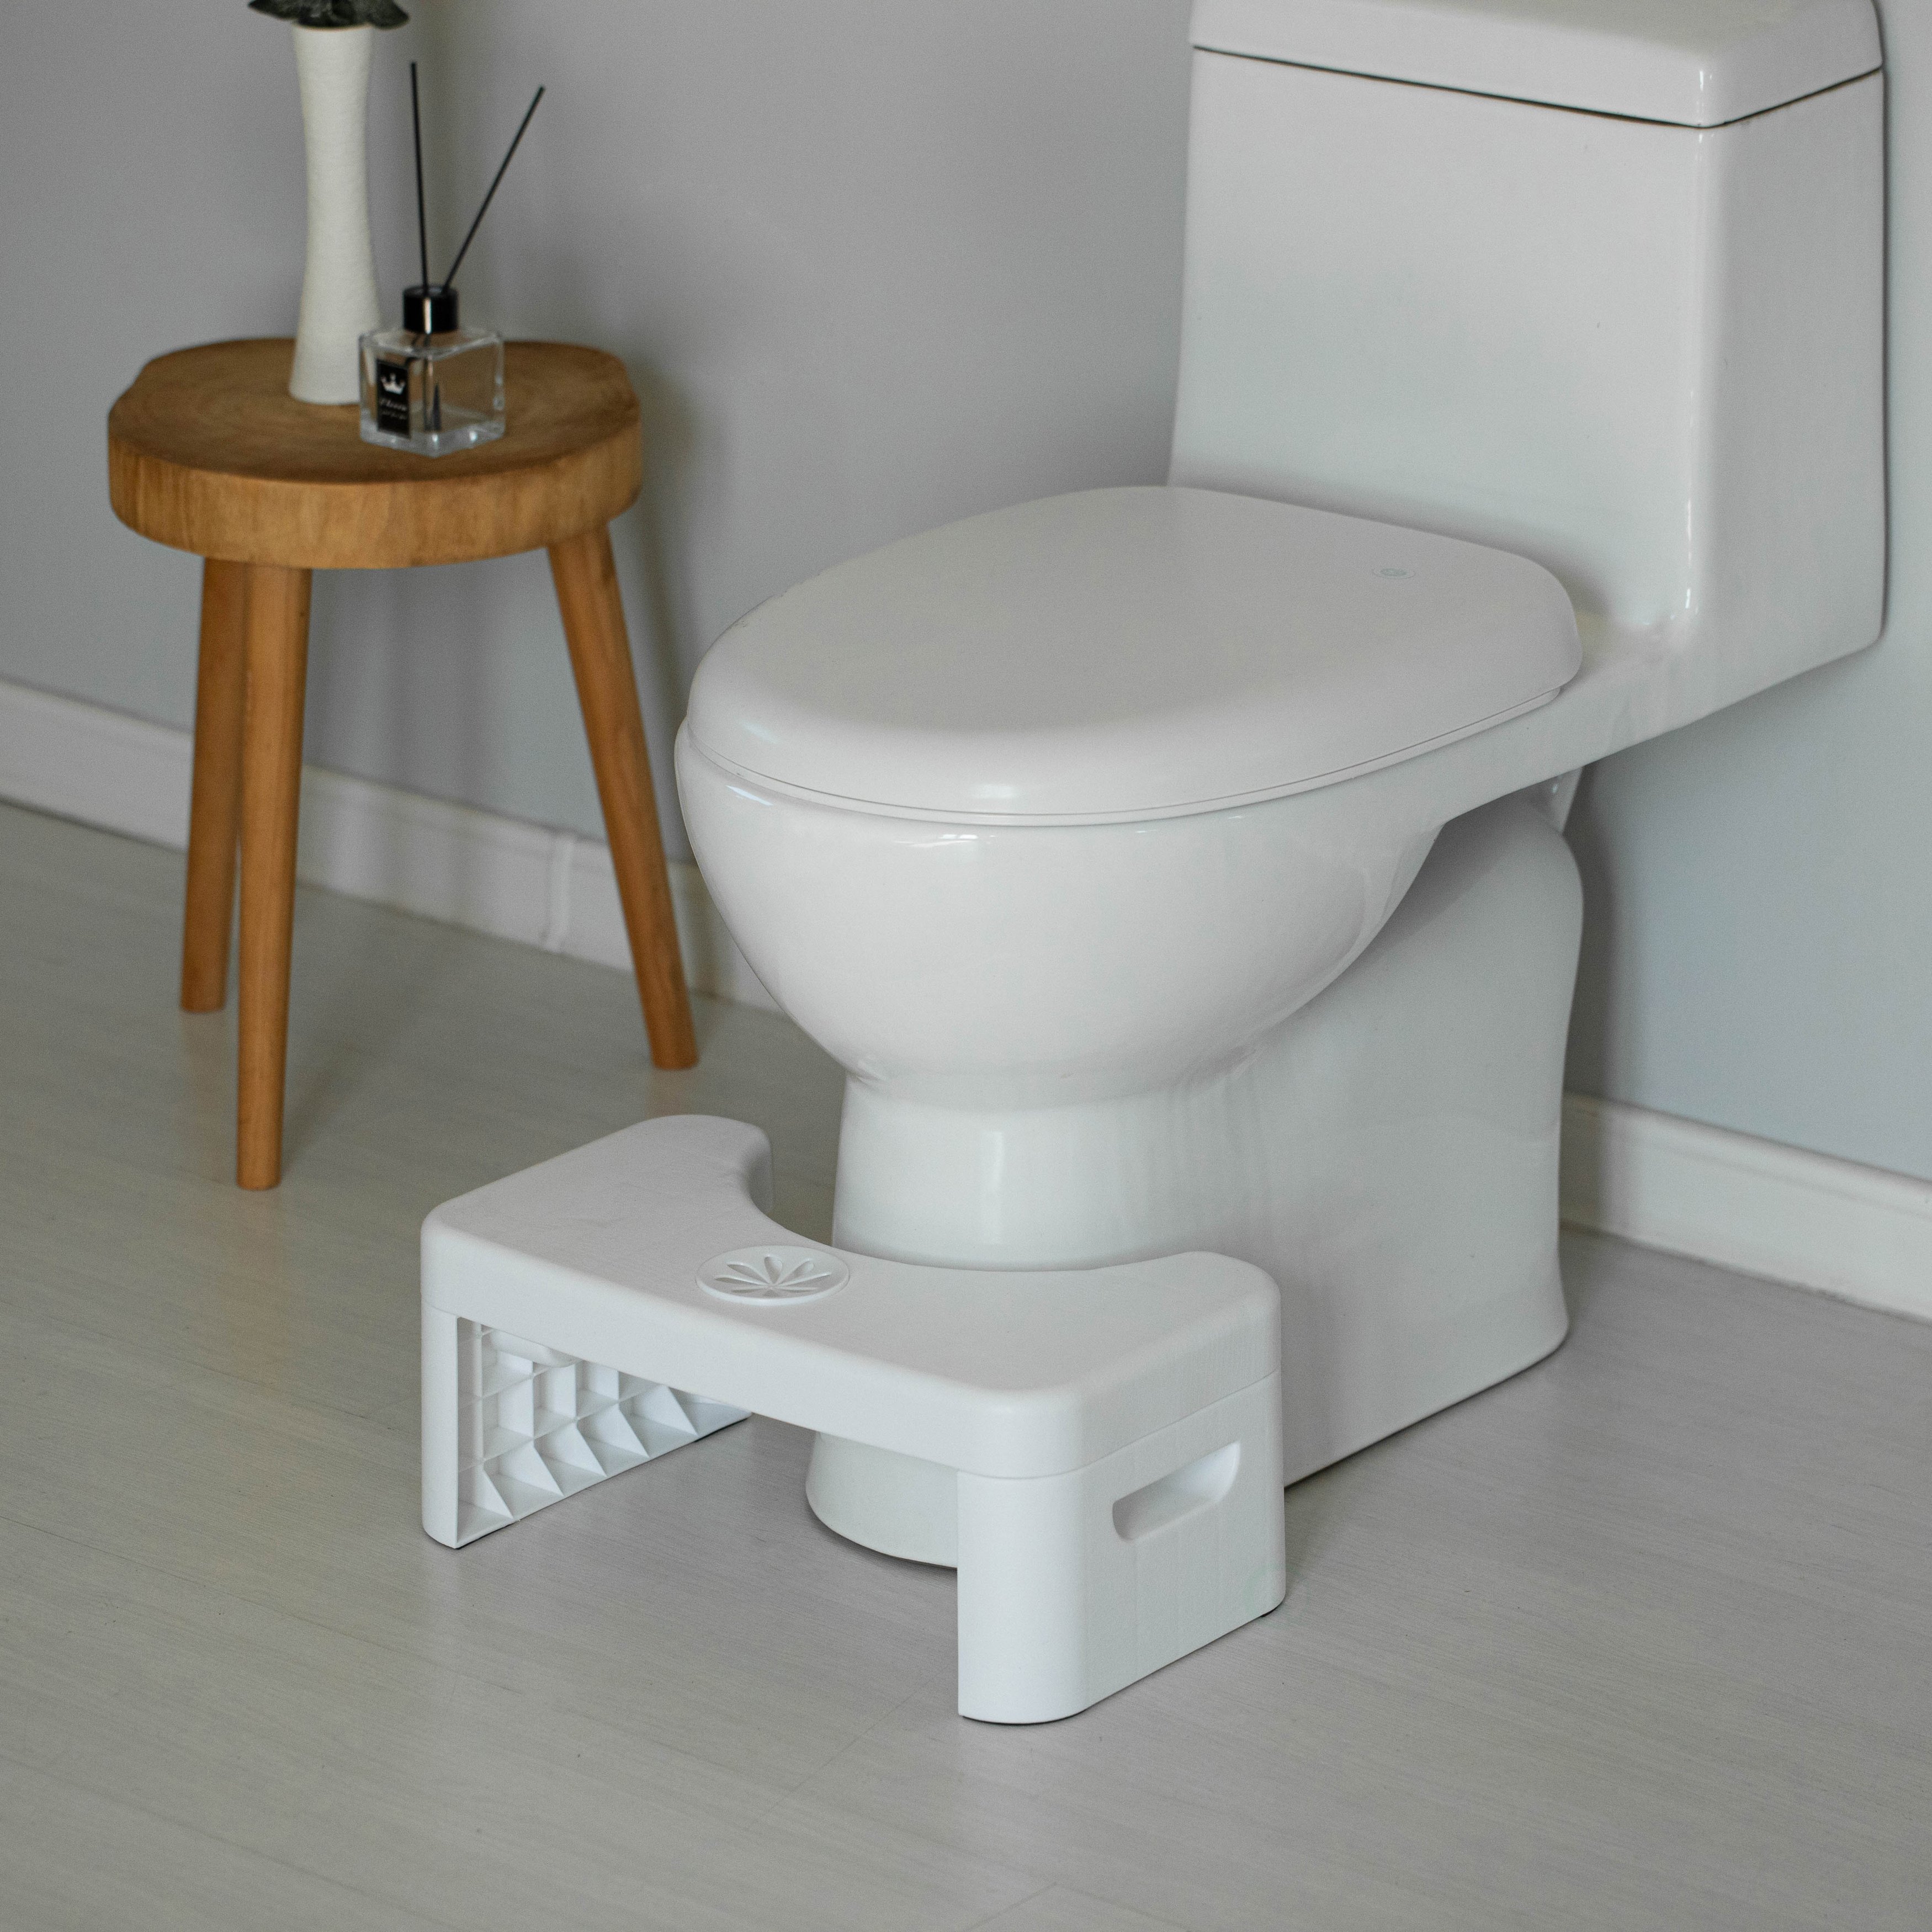 Portable Squatting Bathroom Potty Stool, White Poop Foot Stool, 6.25” Toilet Assistance Foldable Step Stool With Freshener Space